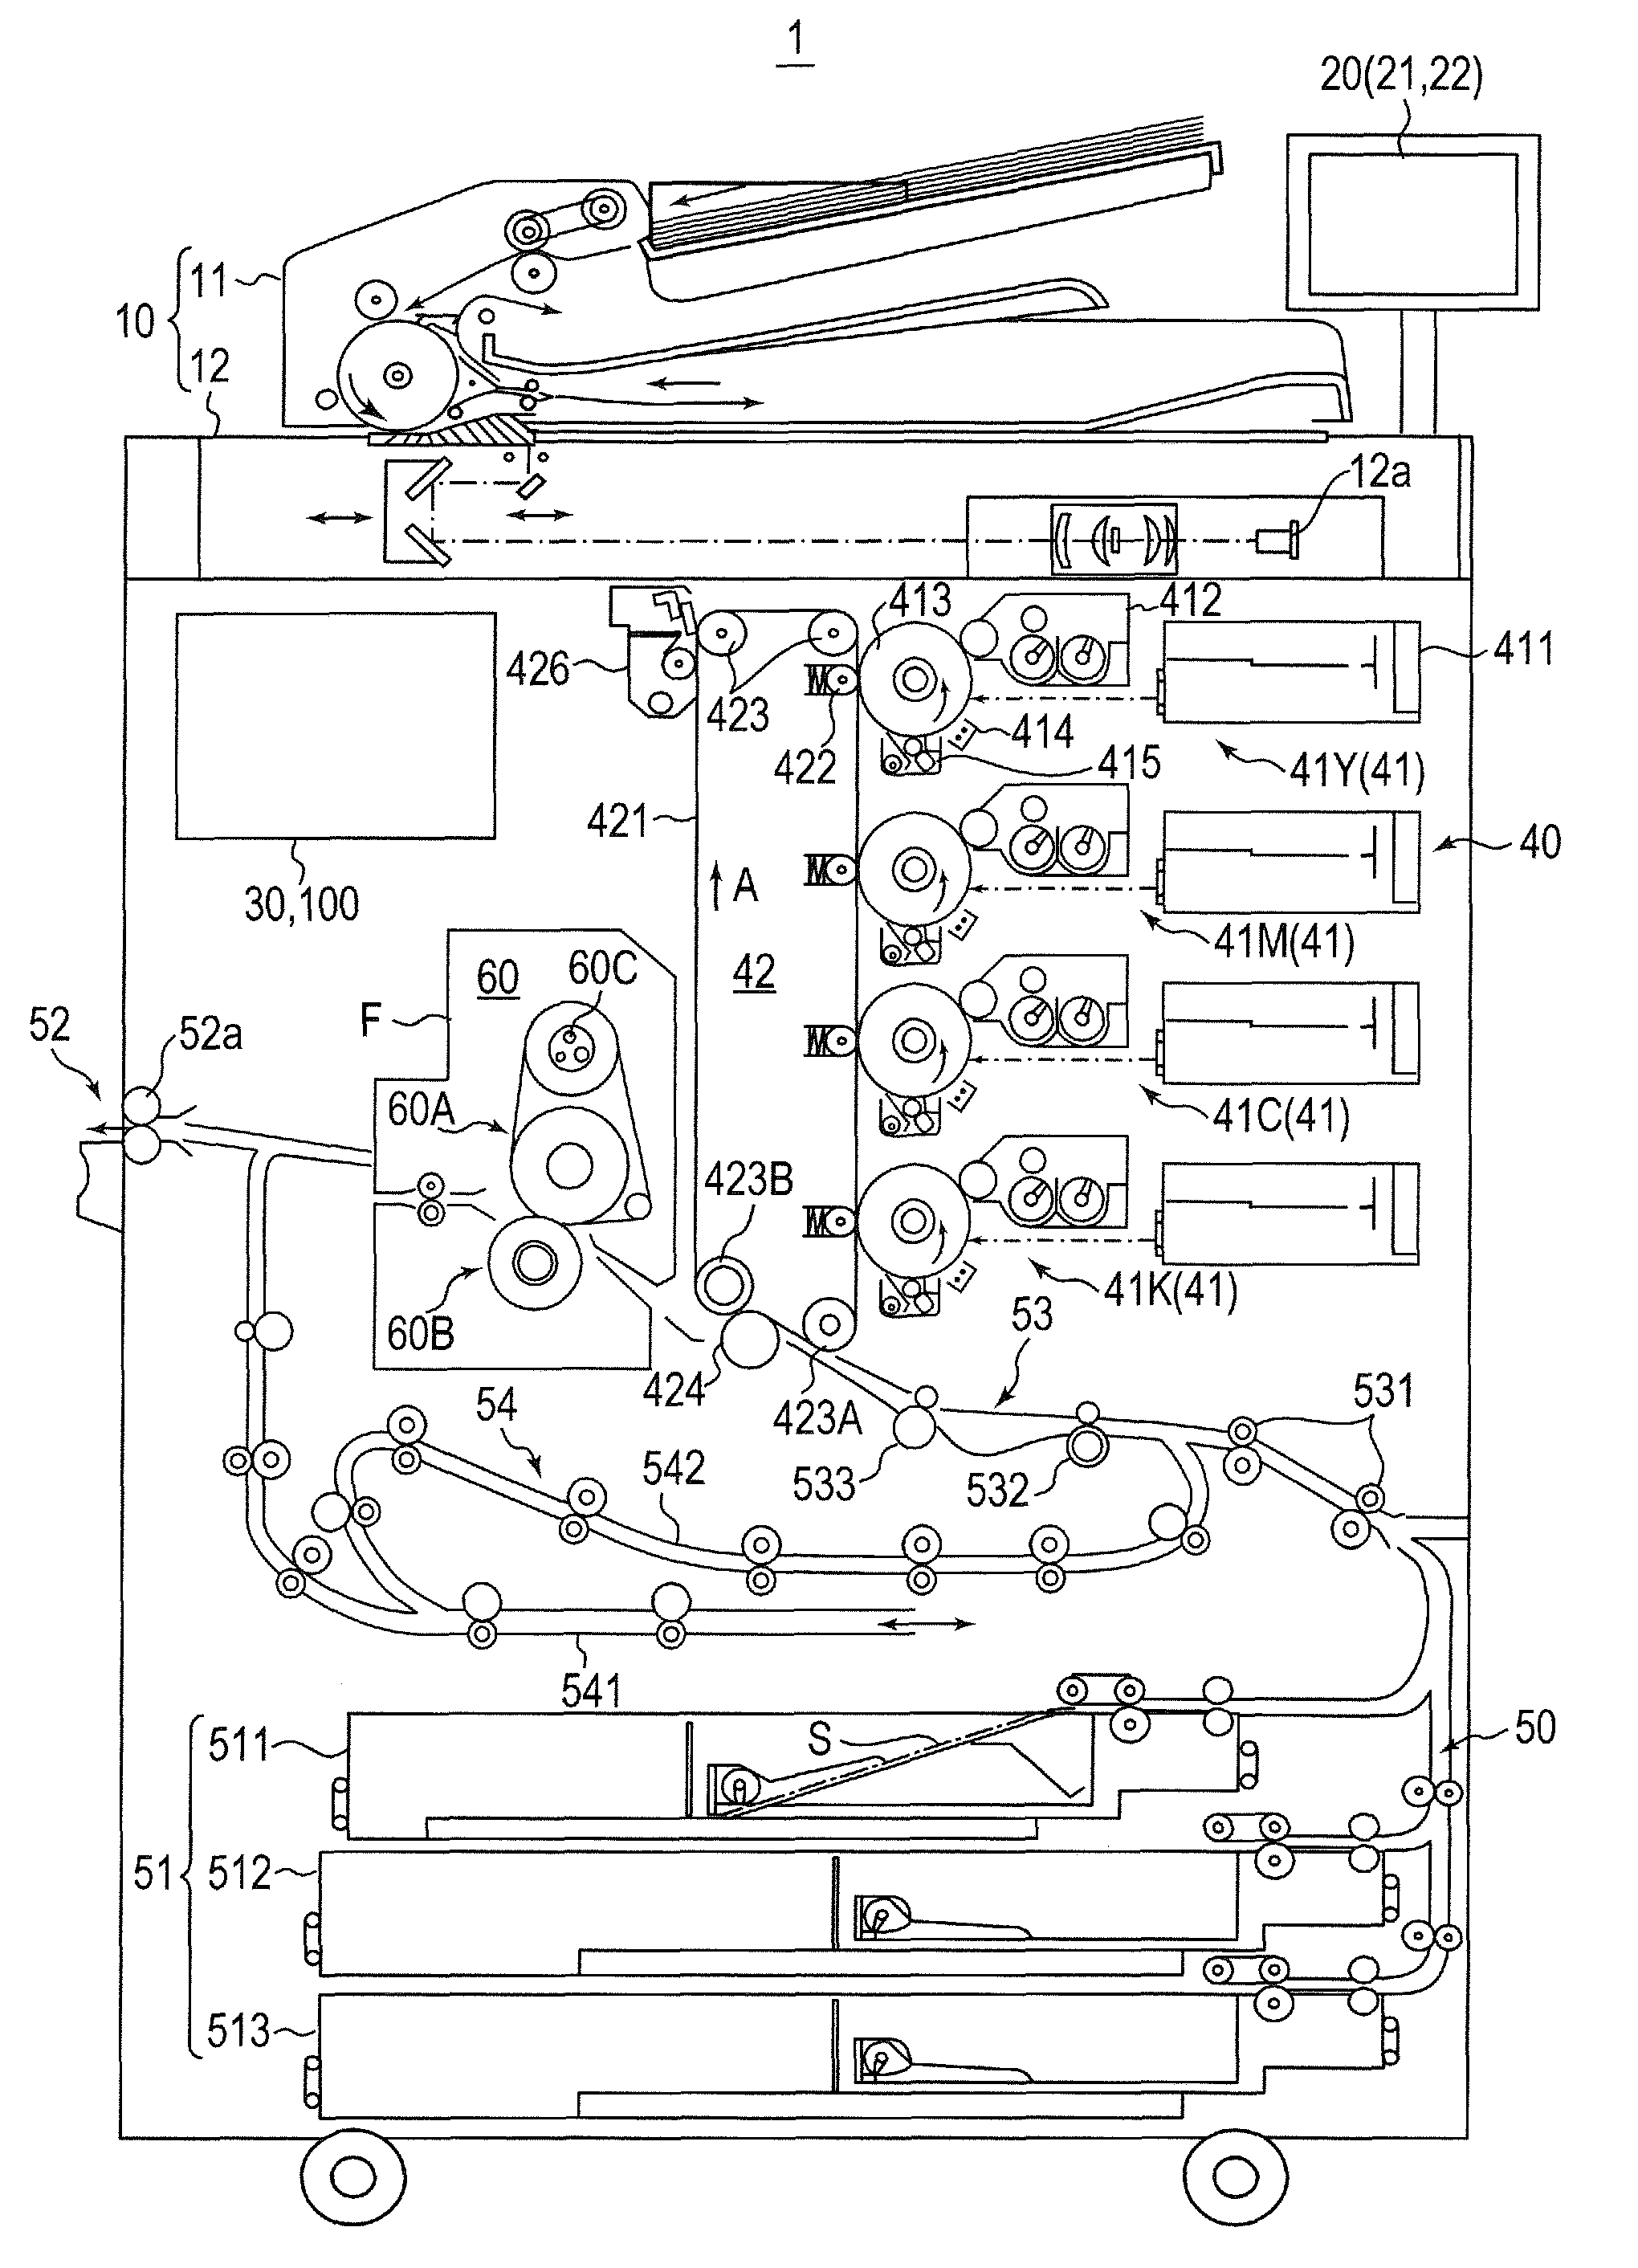 Image forming apparatus with registration rollers configured to reset the lateral position of a sheet